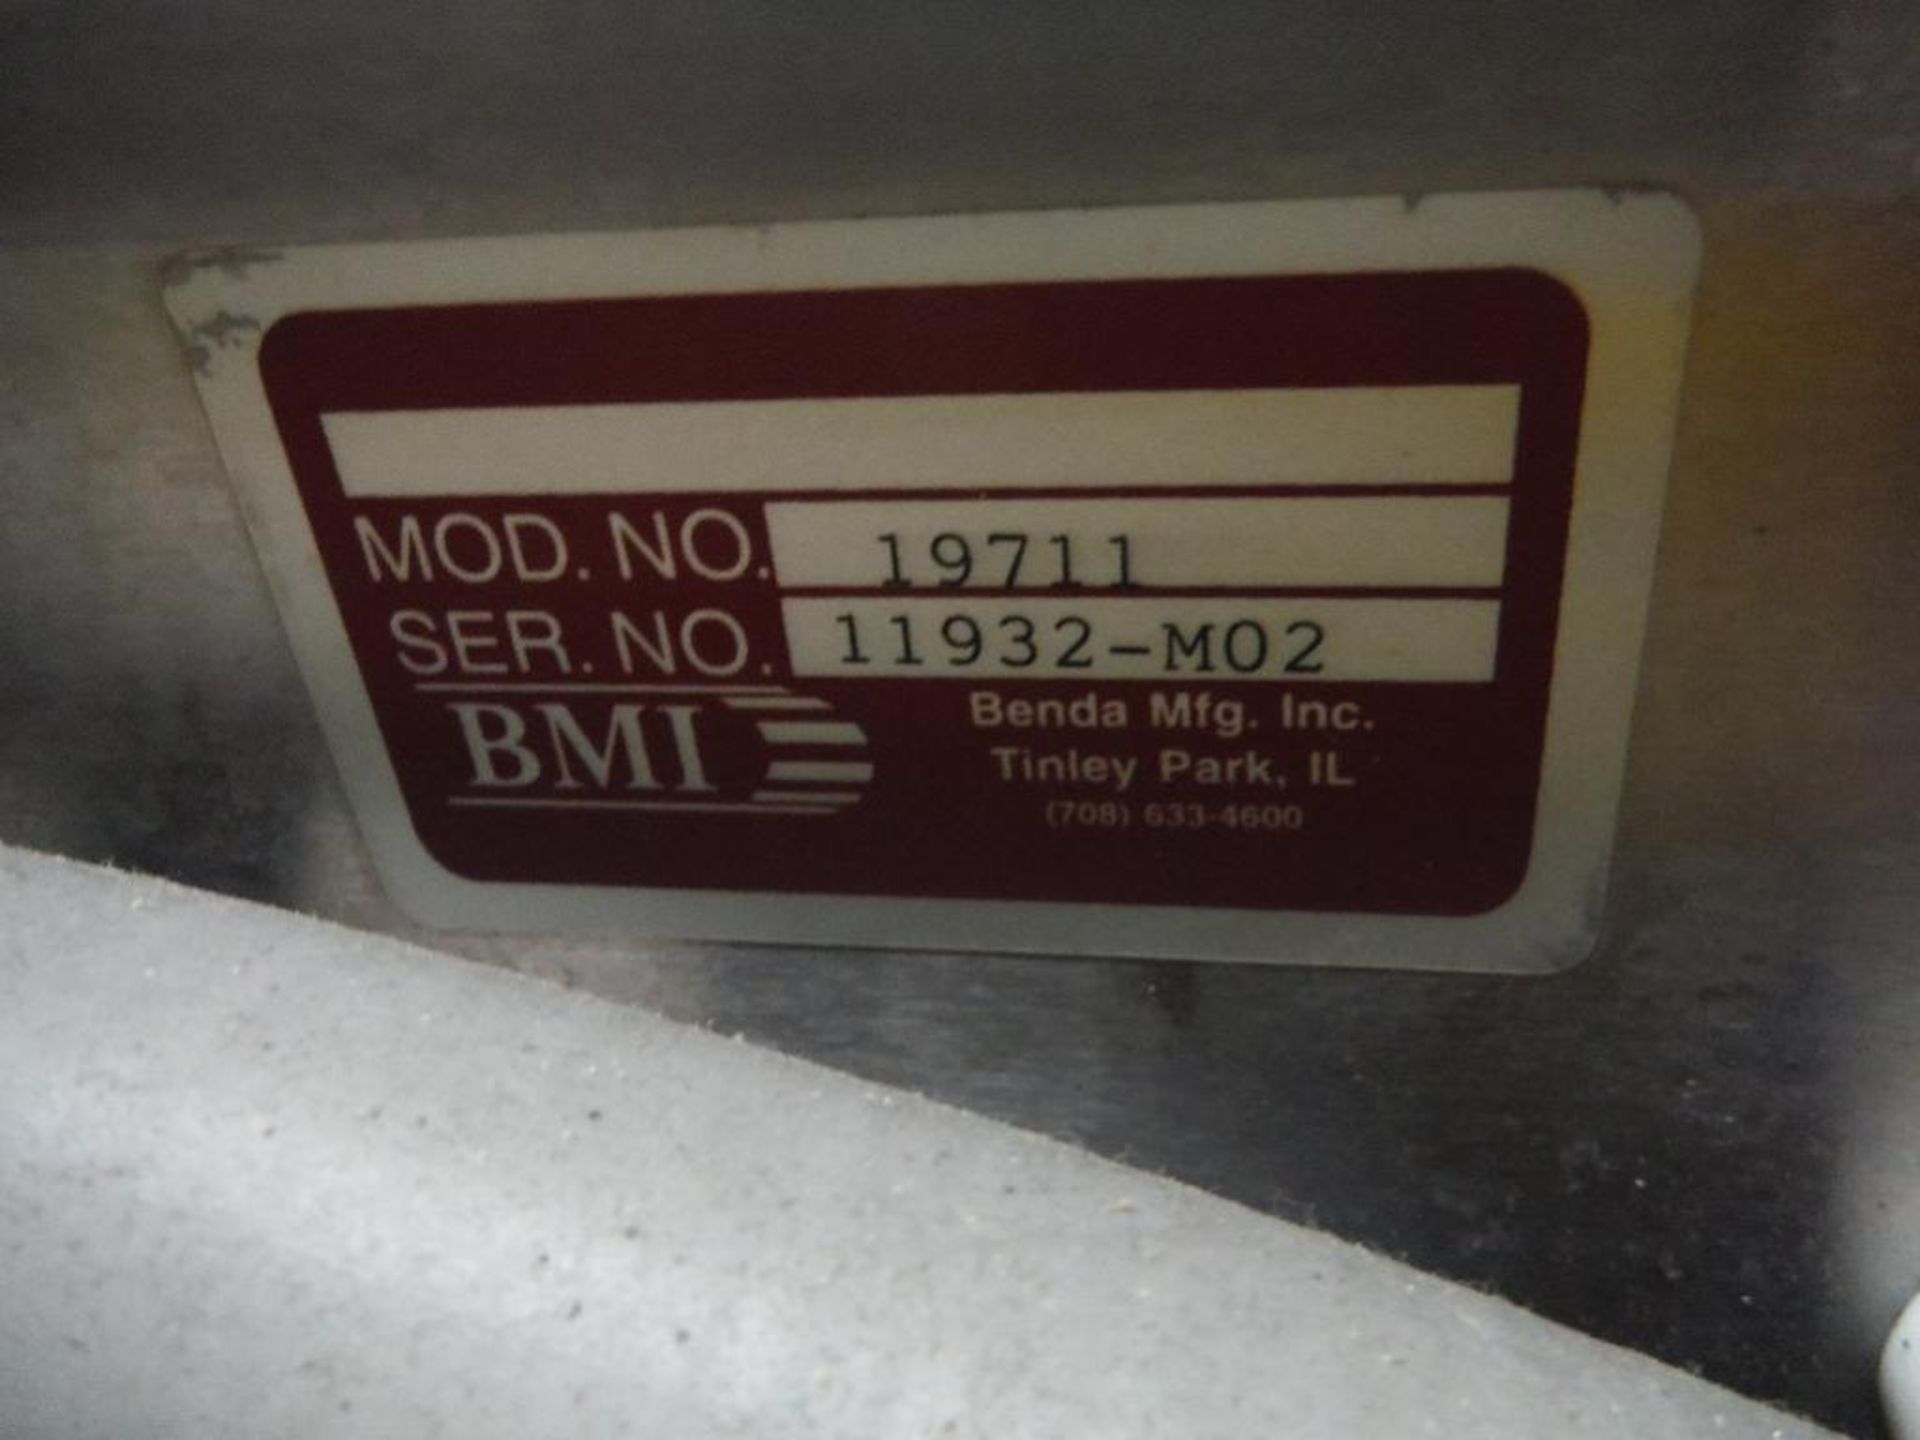 BMI 180 degree 3 lane conveyor, Model 19711, SN 11932-M02, 9 in. wide belts each, overall 118 in. lo - Image 8 of 9